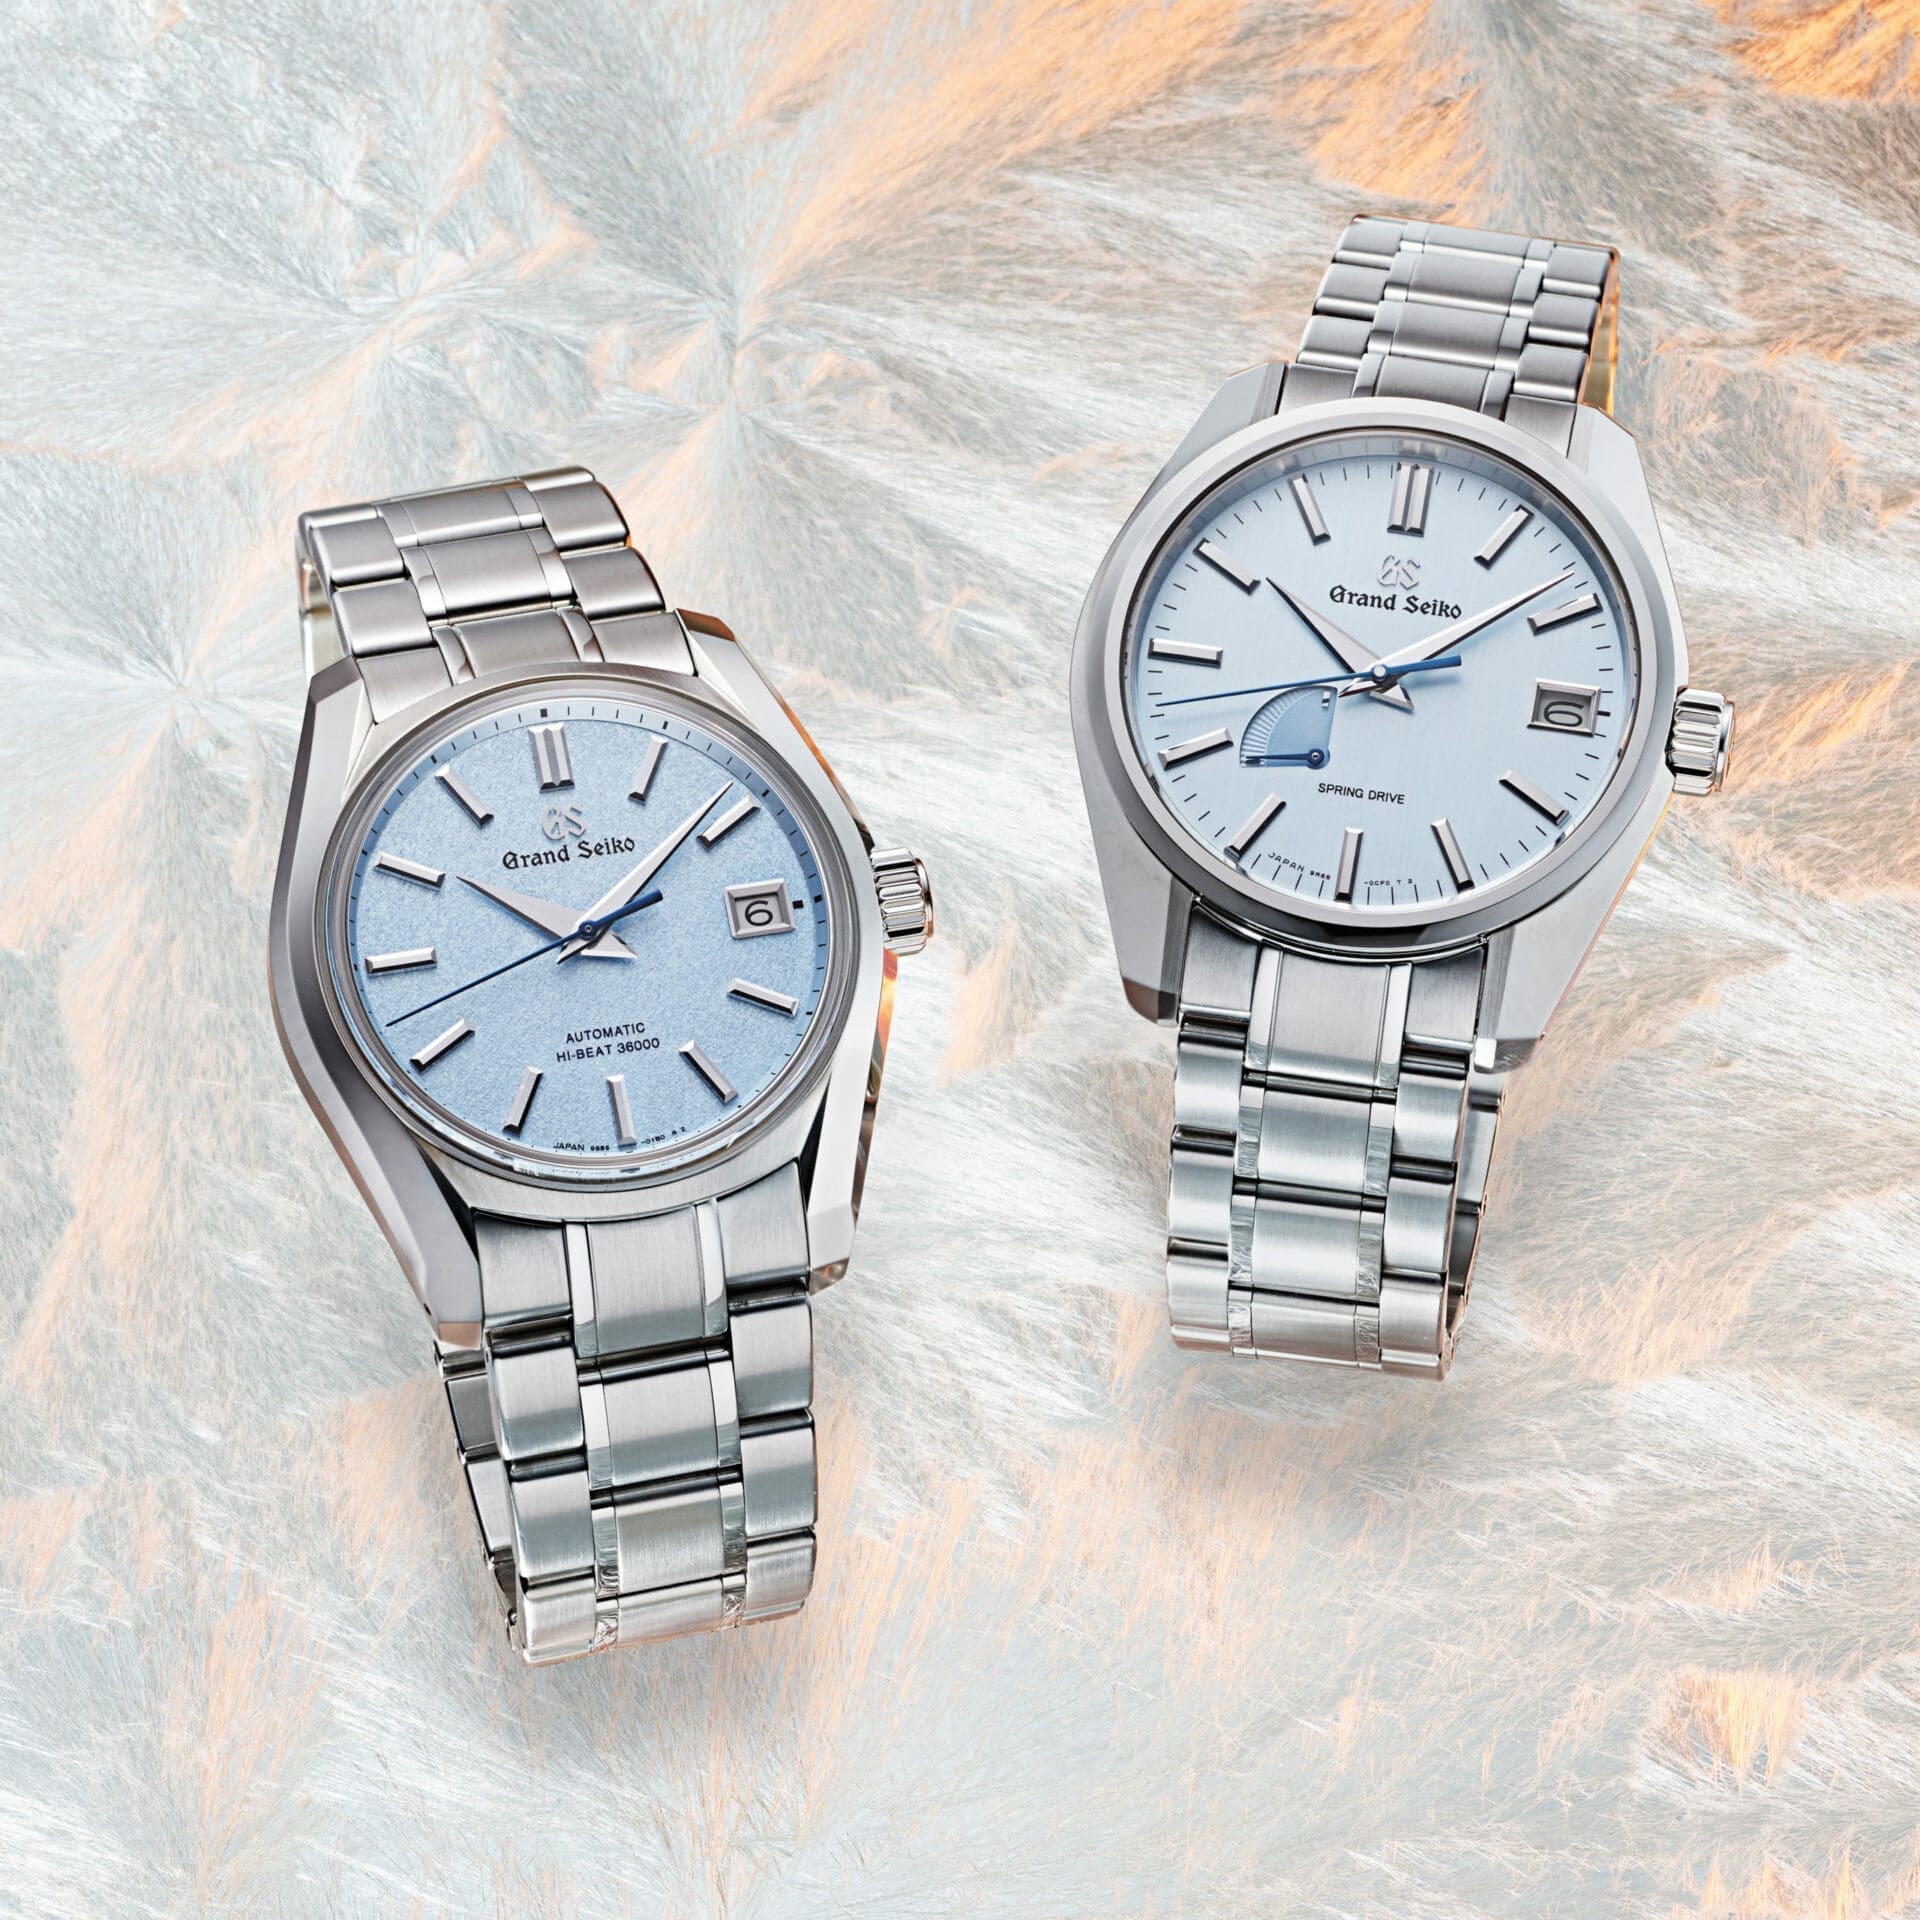 INTRODUCING: Grand Seiko kicks off 2022 with icy blue dials, one of which is kira-zuri!